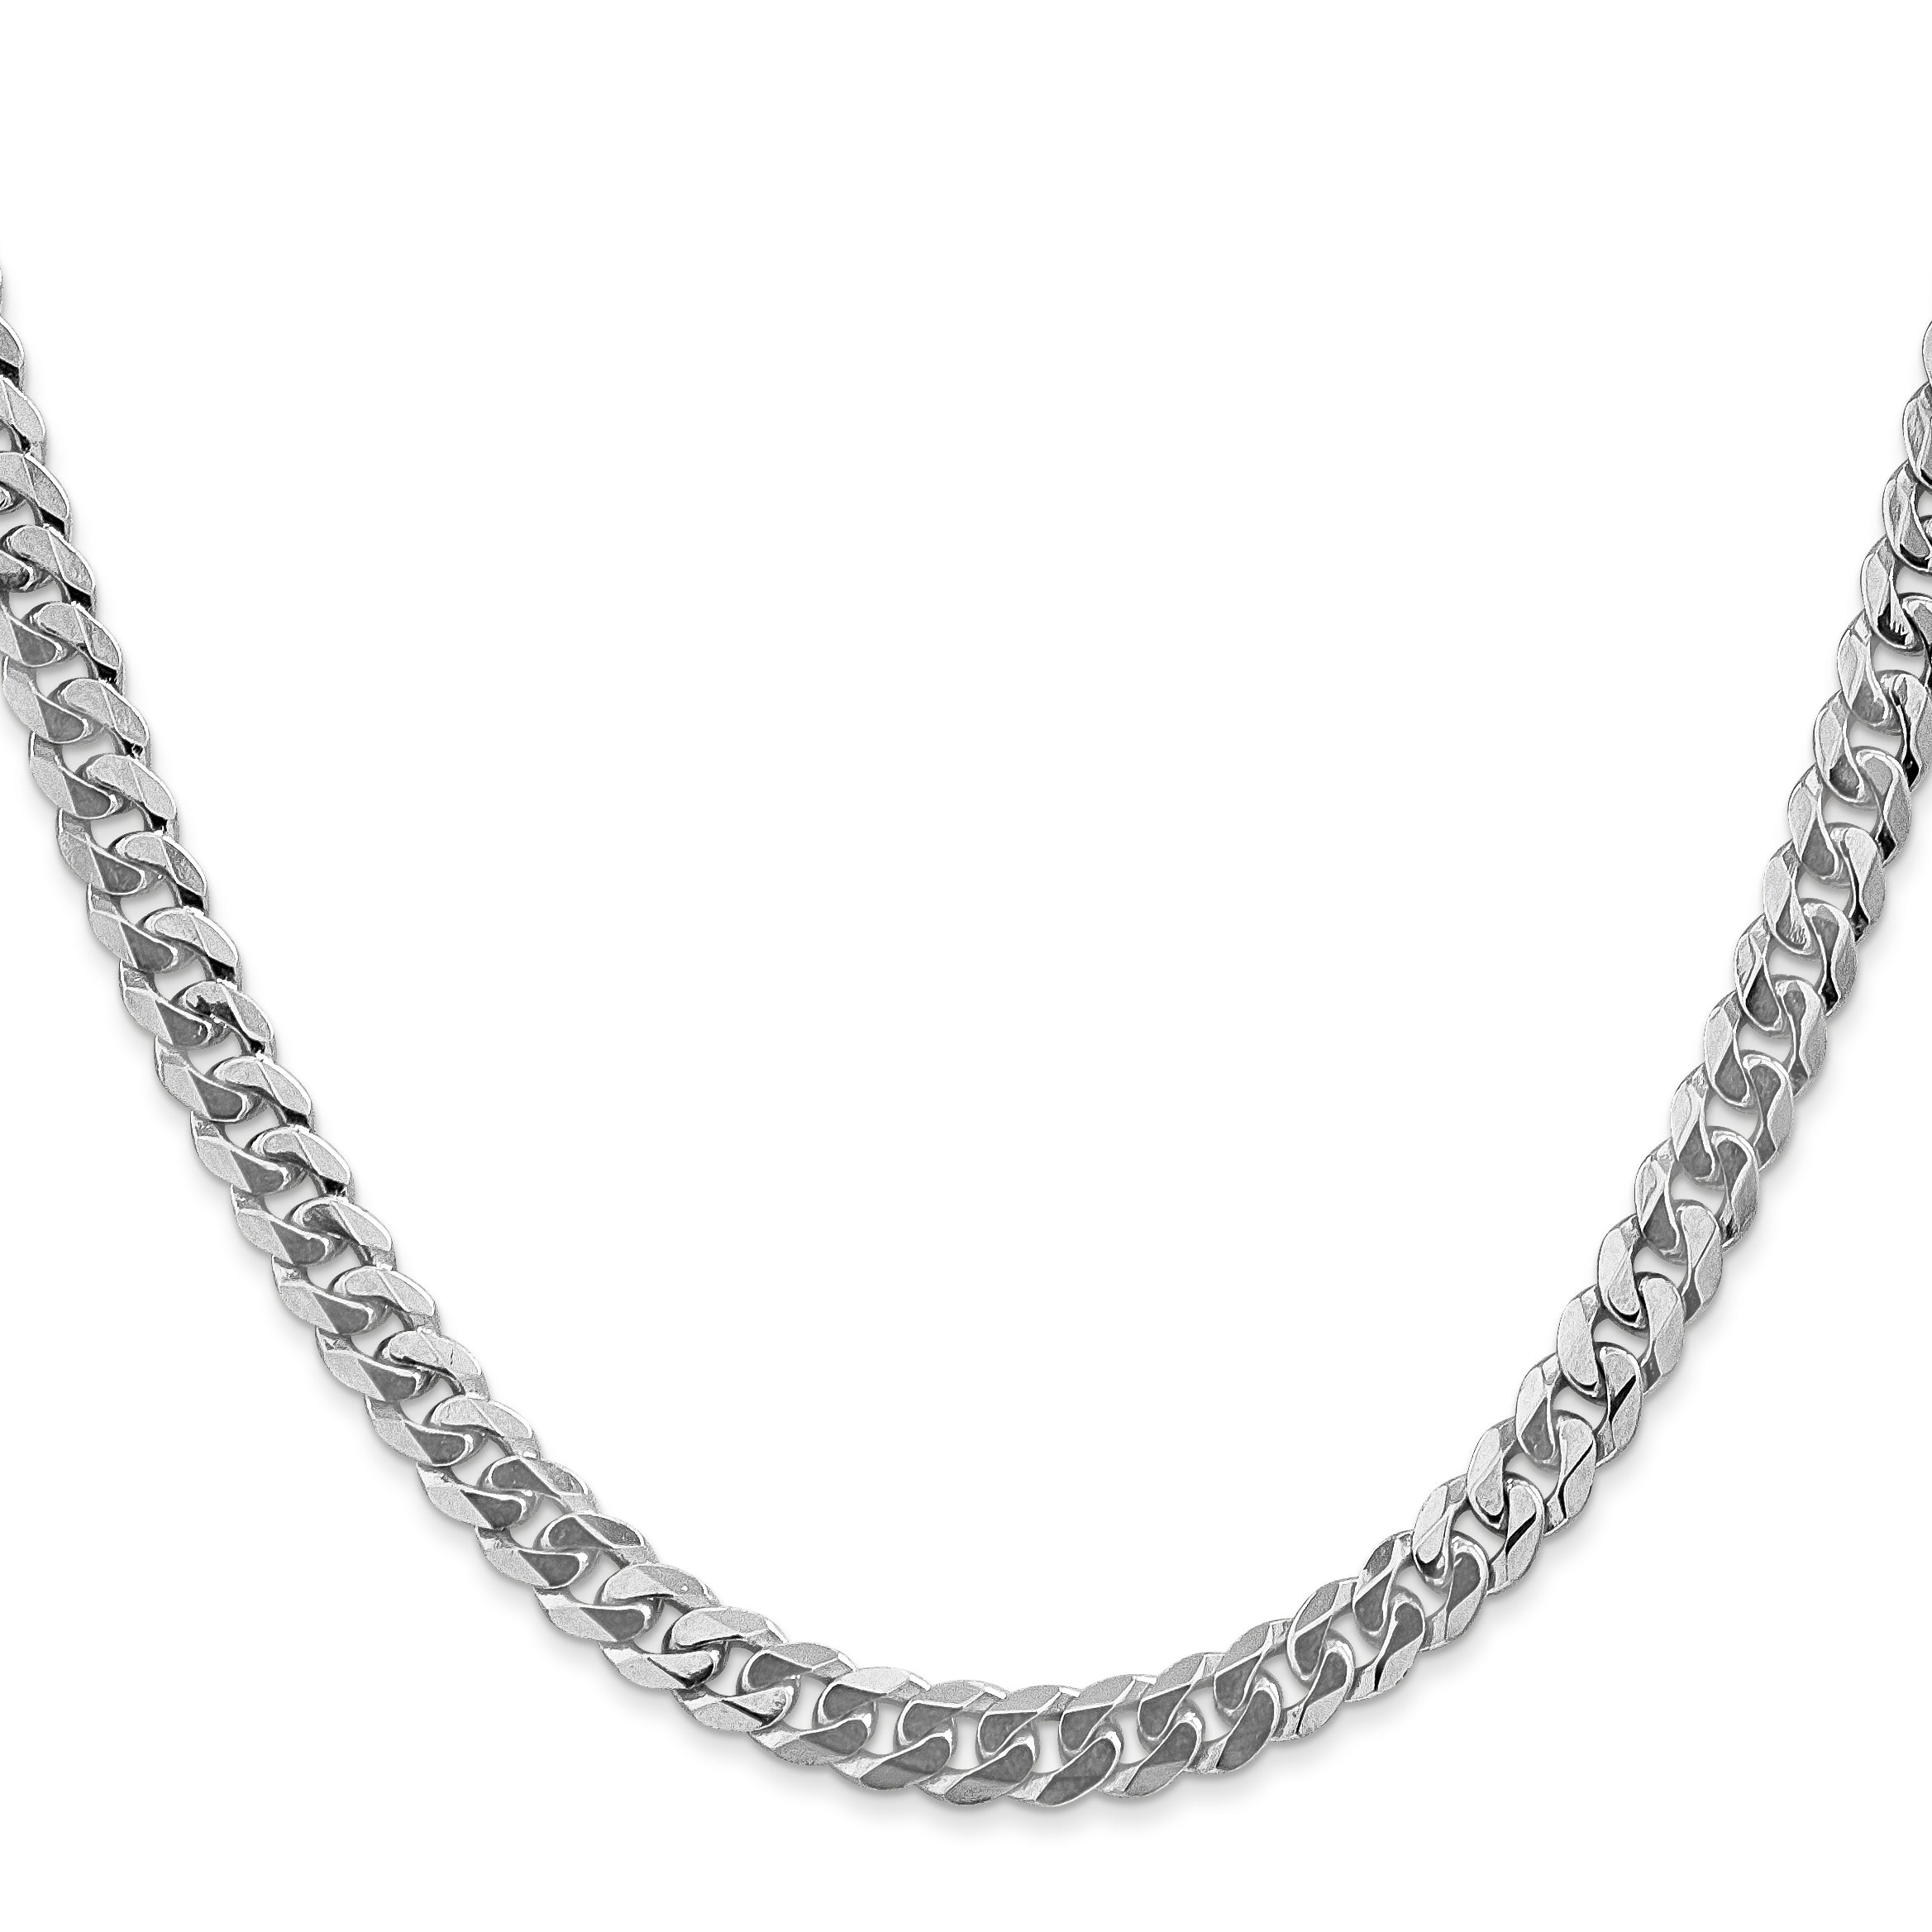 14K White Gold 18 inch 5.75mm Flat Beveled Curb with Lobster Clasp Chain